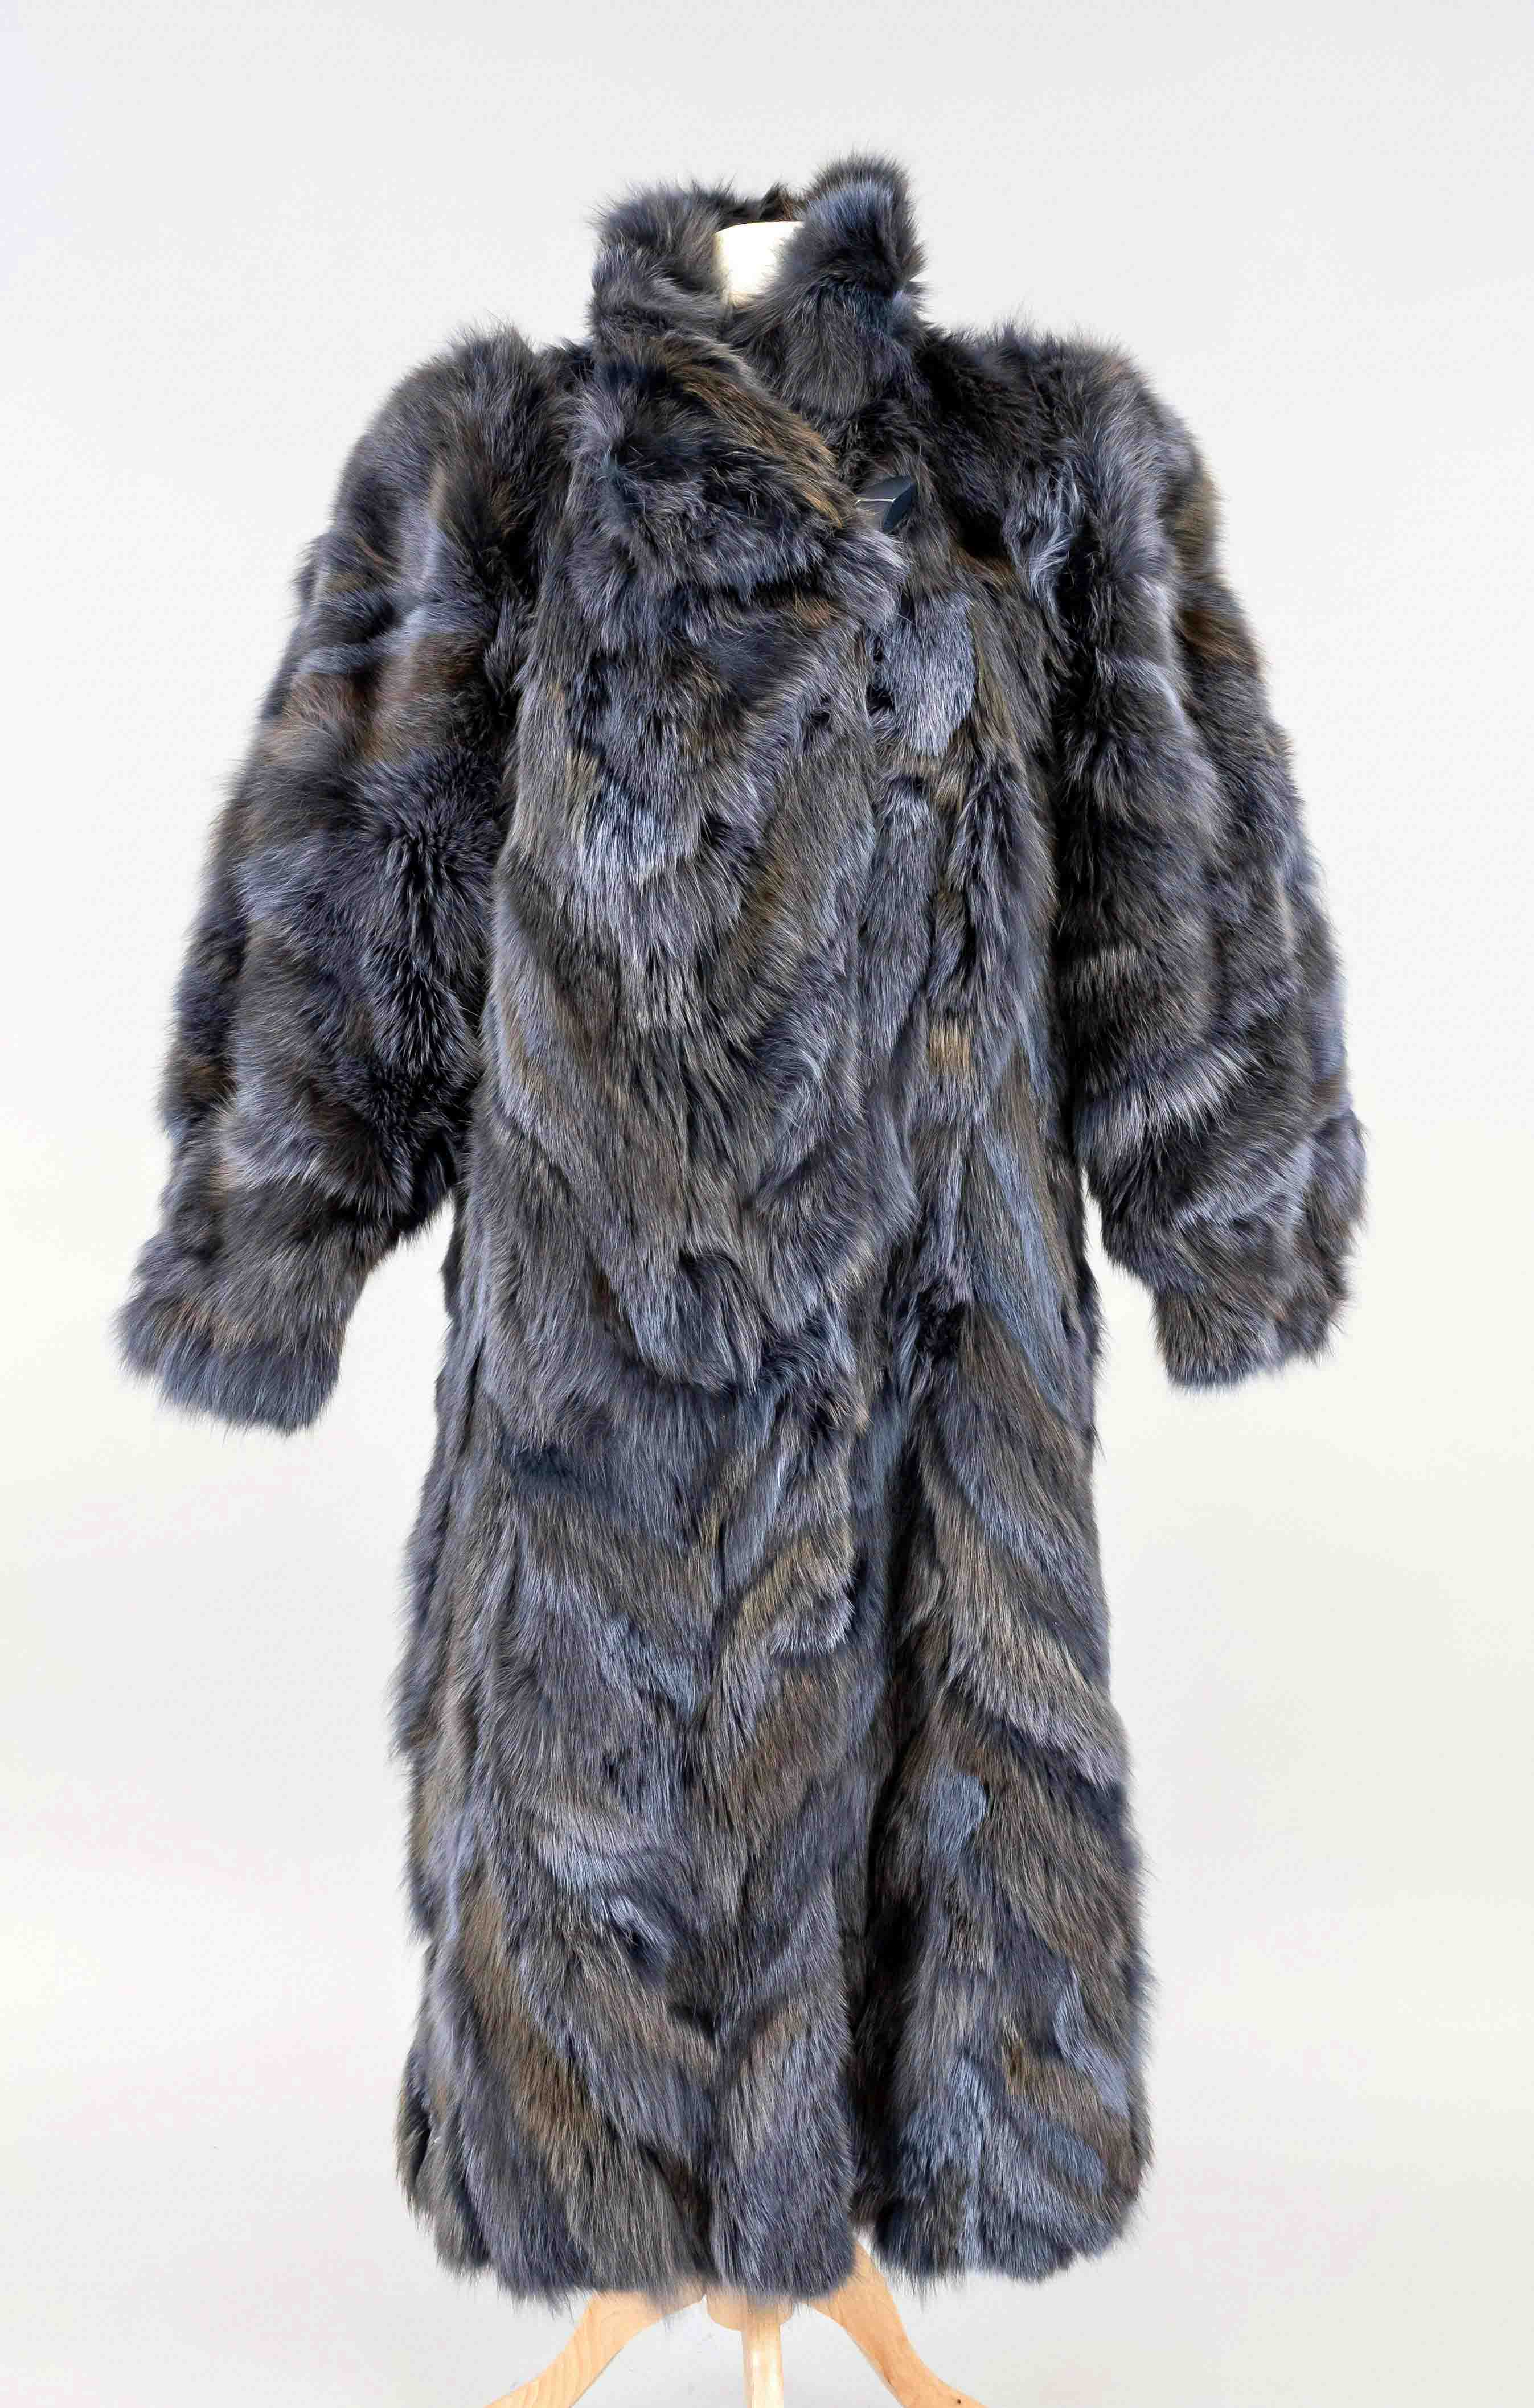 Ladies coat, 2nd half of the 20th century, mottled fox fur in blue, brown and grey tones, wide